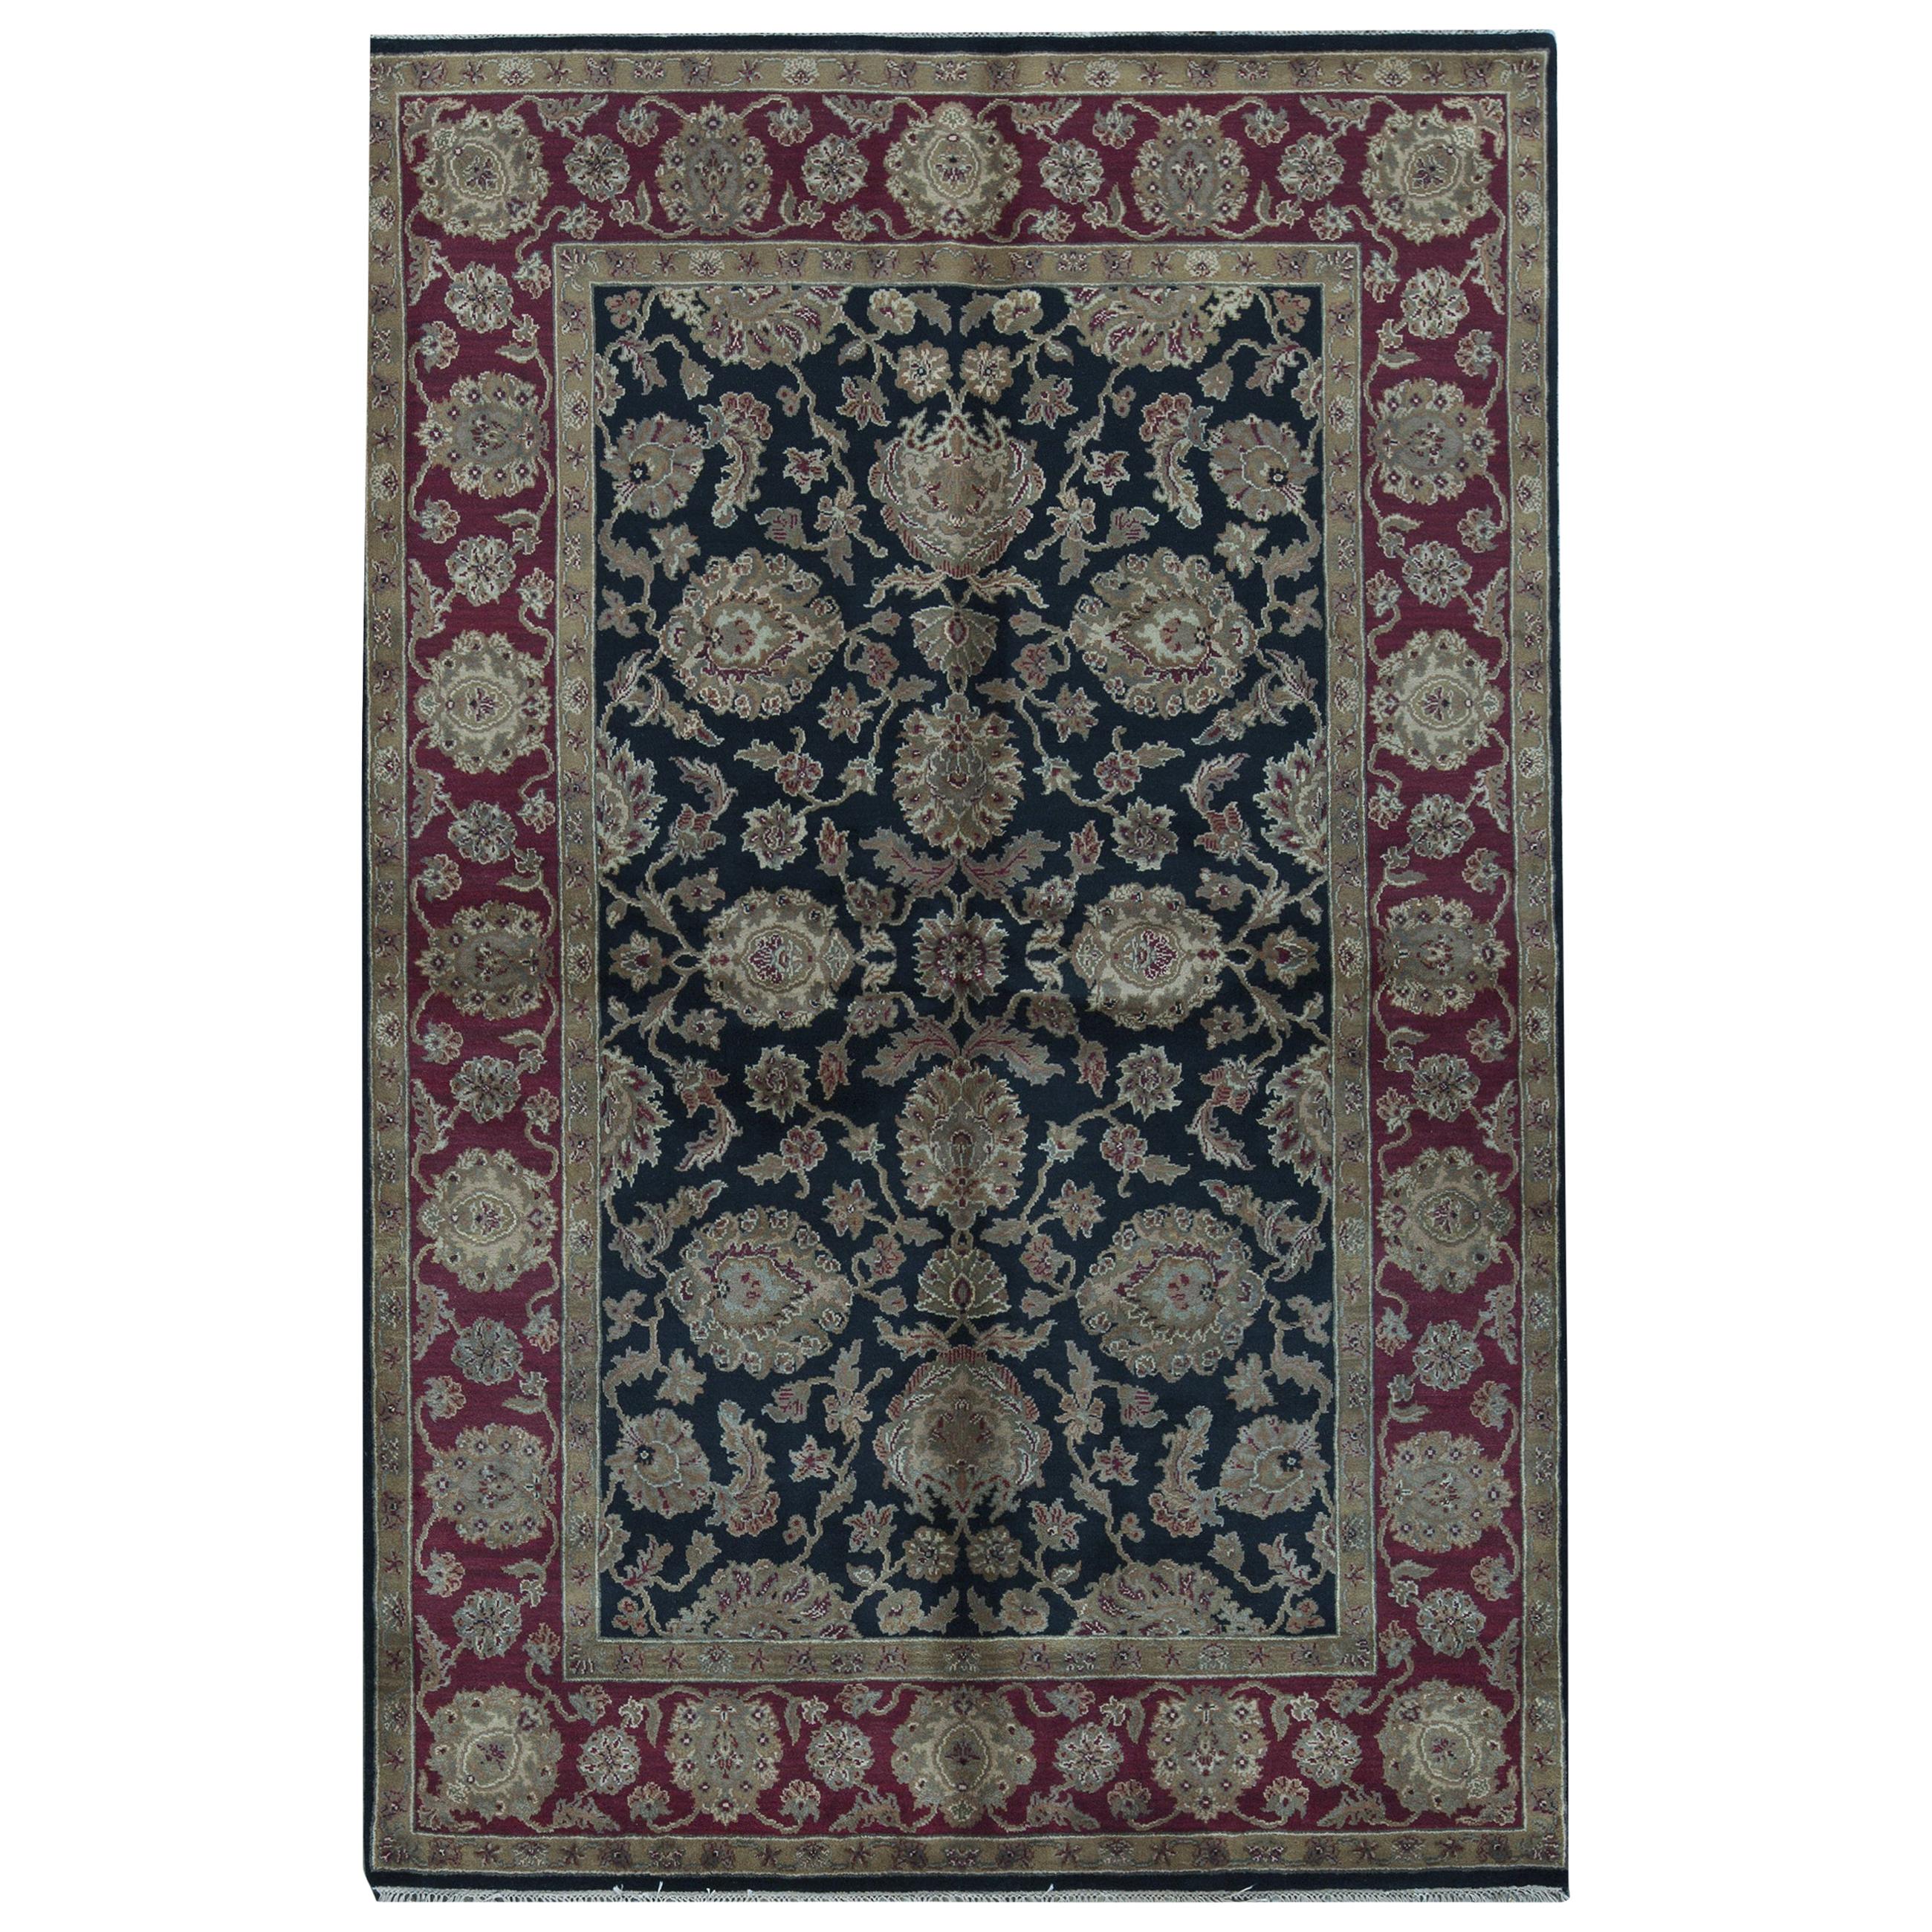 One of a Kind Traditional Hand Woven Wool Area Rug 6' x 9'